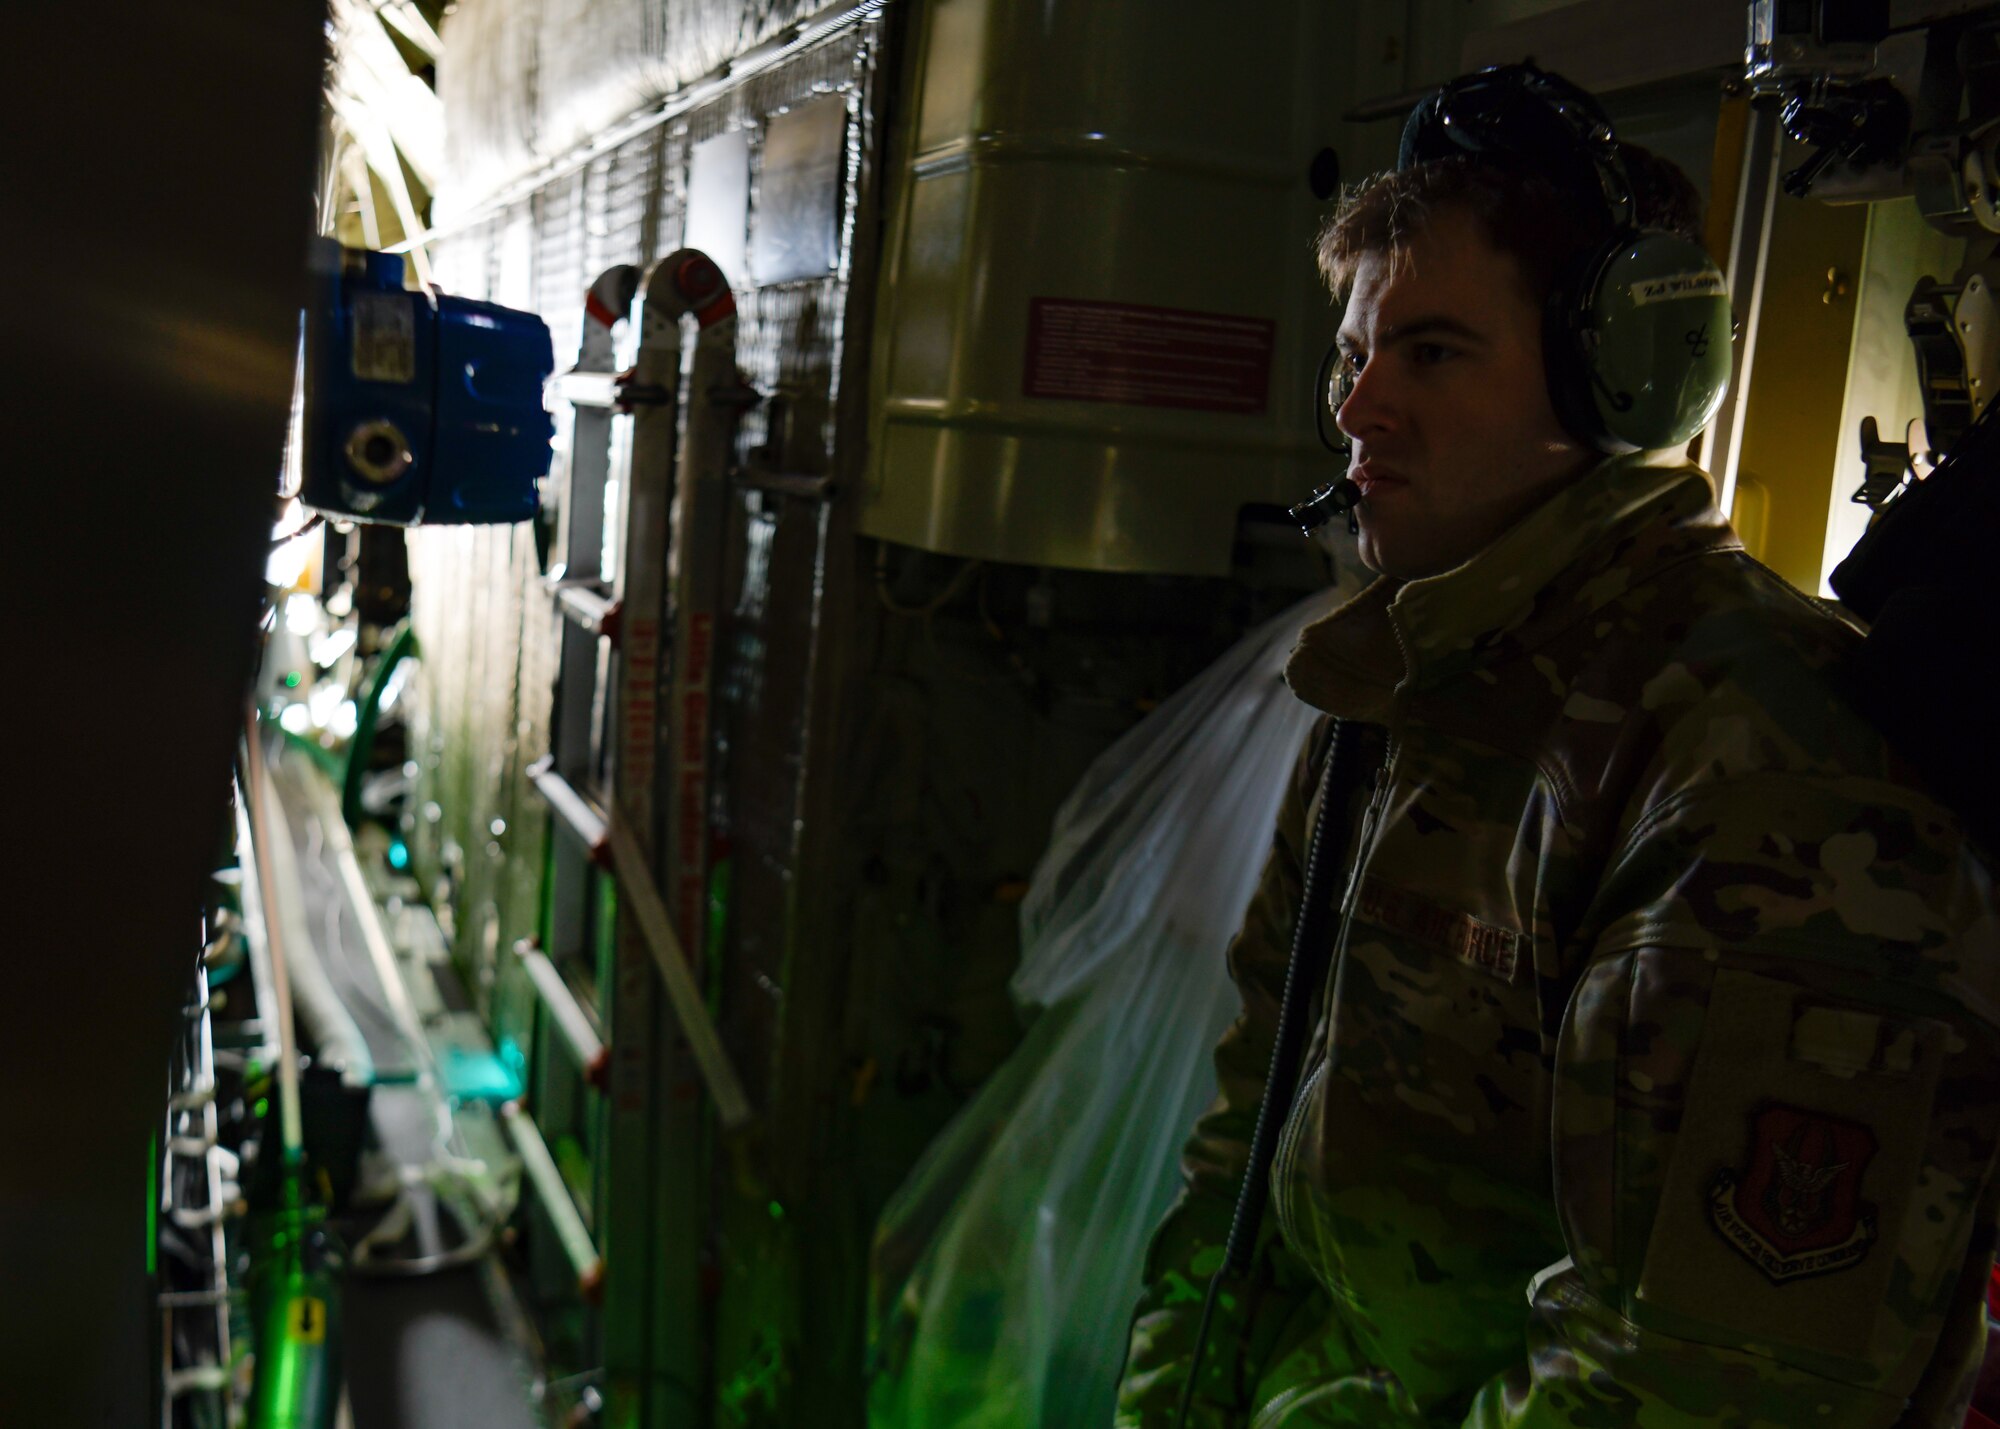 Staff Sgt. Zachery Wilson, an aerial spray system maintainer assigned to the 910th Maintenance Squadron, monitors the product loading of an electronic modular aerial spray system aboard an aerial spray modified C-130H Hercules aircraft assigned to the 910th Airlift Wing, Youngstown Air Reserve Station, Ohio, on March 14, 2023, at Hill Air Force Base, Utah.